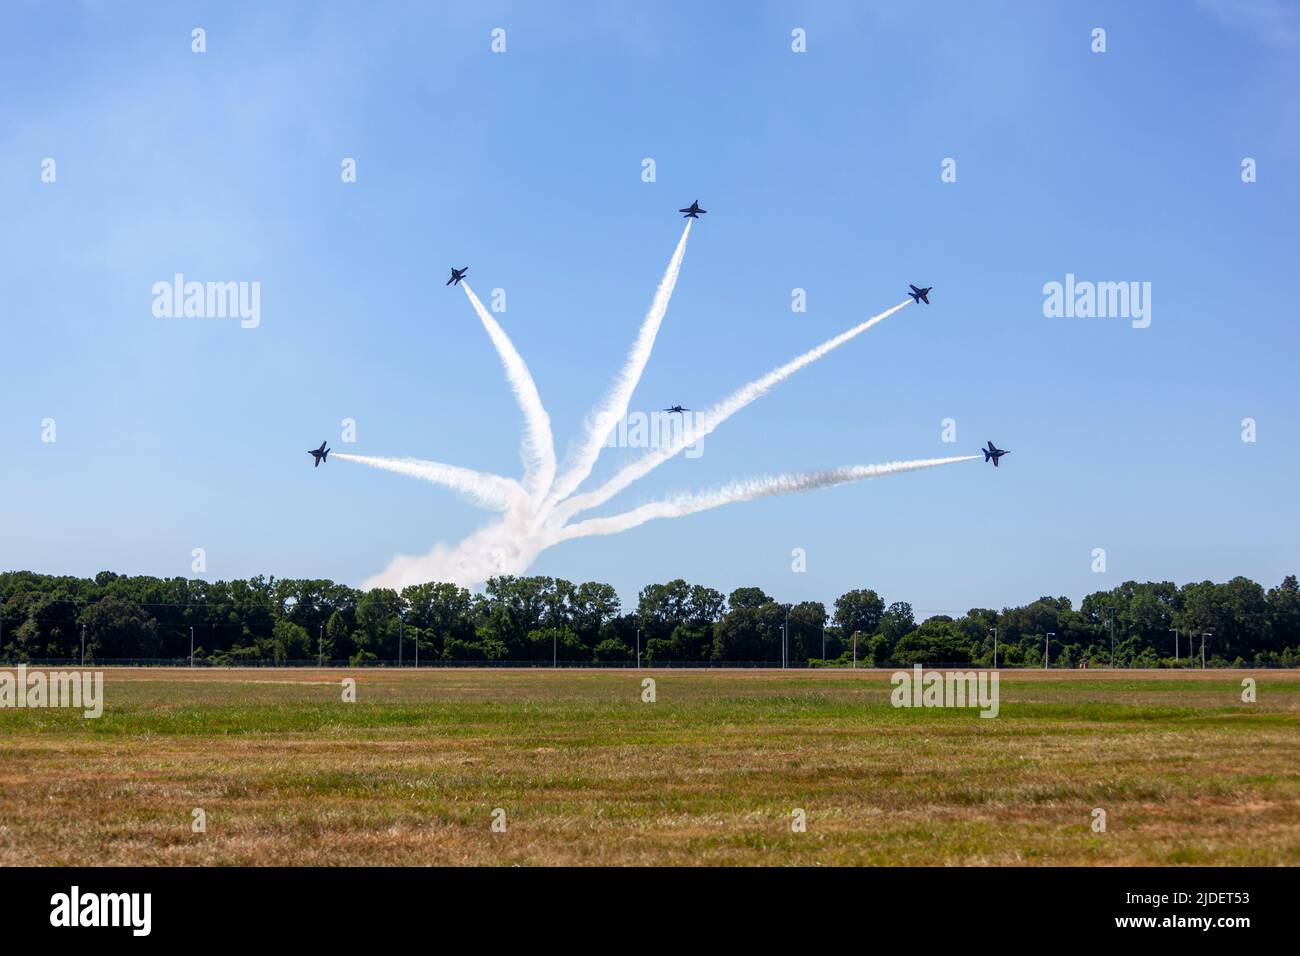 The United States Navy Blue Angels flying the F/A-18 Super Hornet E/F at the MidSouth Air Show over Millington, Tennessee on June, 18th 2022 Stock Photo